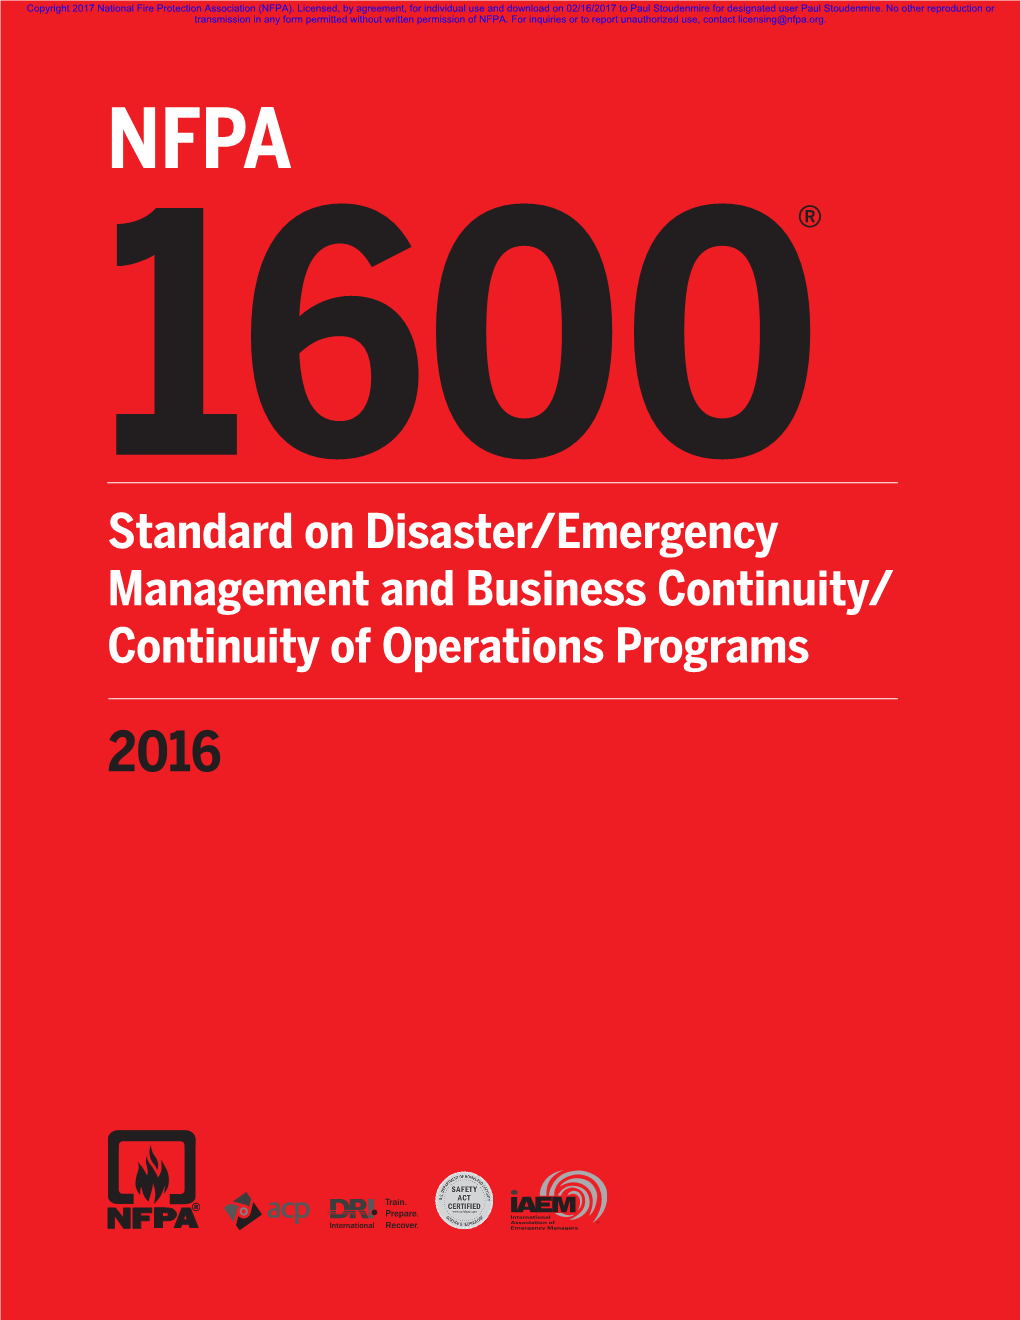 NFPA 1600® Standard on Disaster/Emergency Management and Business Continuity/ Continuity of Operations Programs {32DC031B-42C8-4945-9B52-CDD21CE3CA5D} 2016